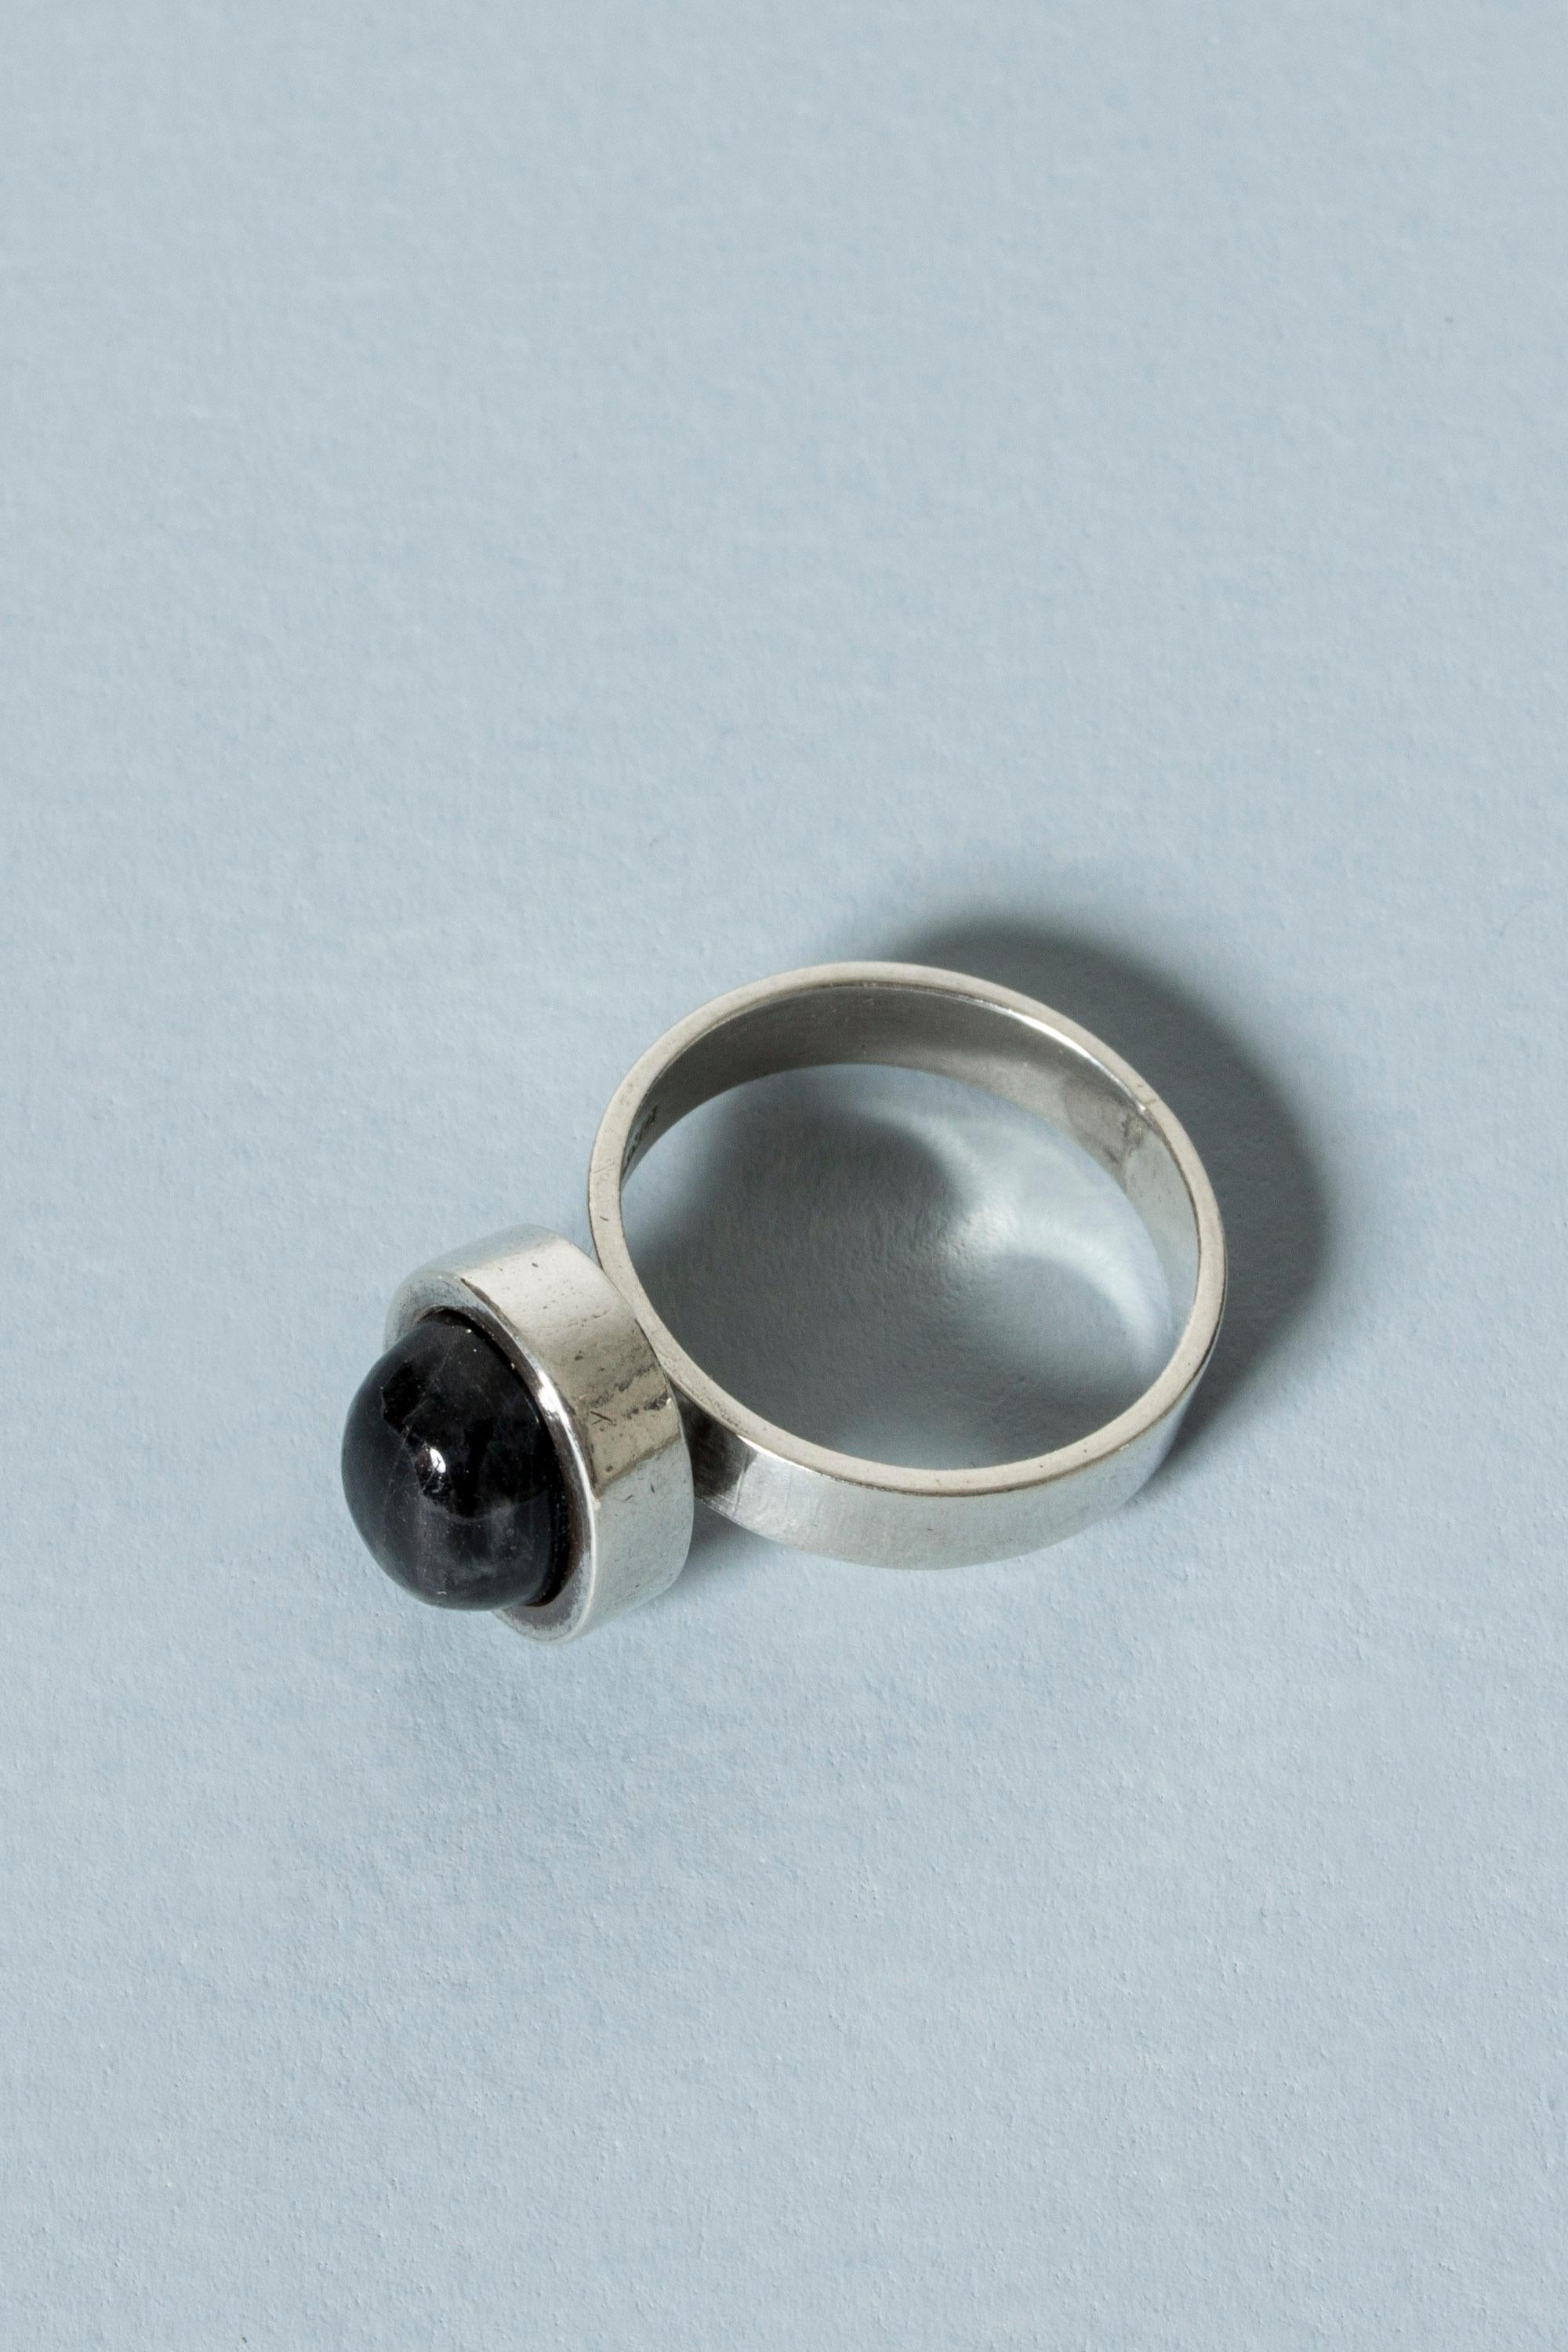 Elegant silver ring from Valo Koru, with an oval, cabochon cut spectrolite stone. The stone and its frame seems to float slightly above the band. Subtle sheen in the stone.

